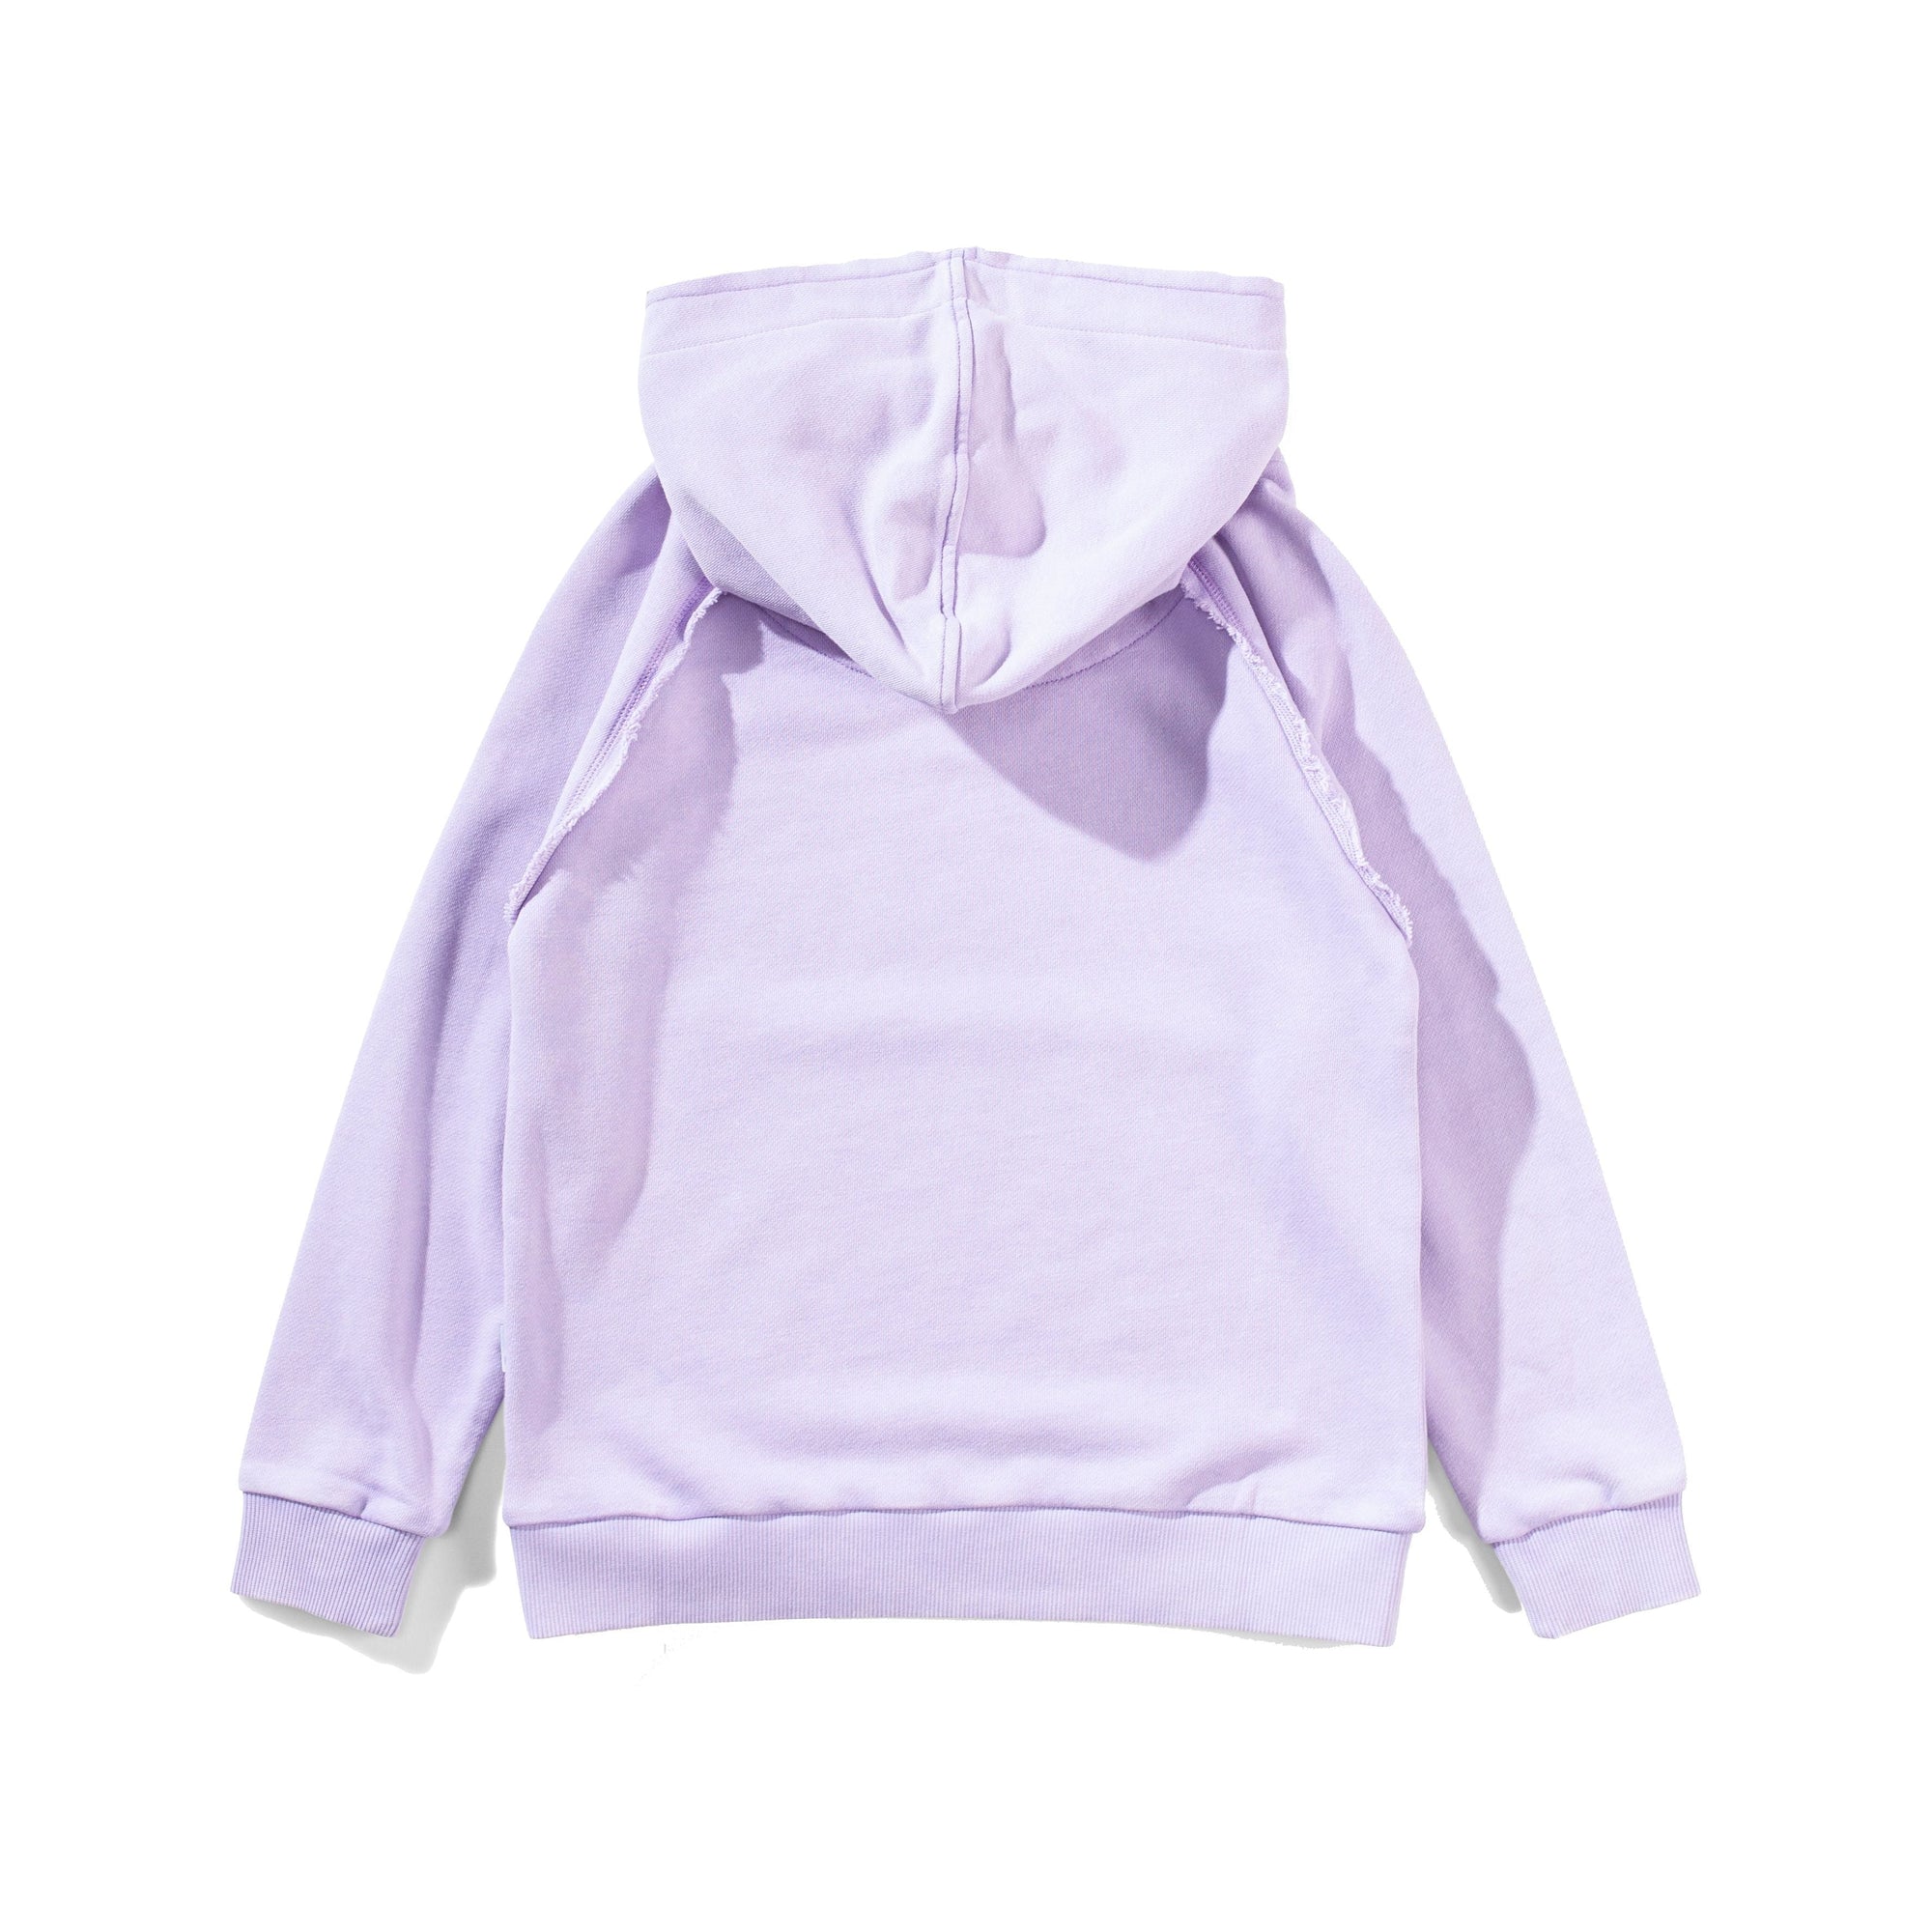 Checkmate Hoody - Mineral Lilac